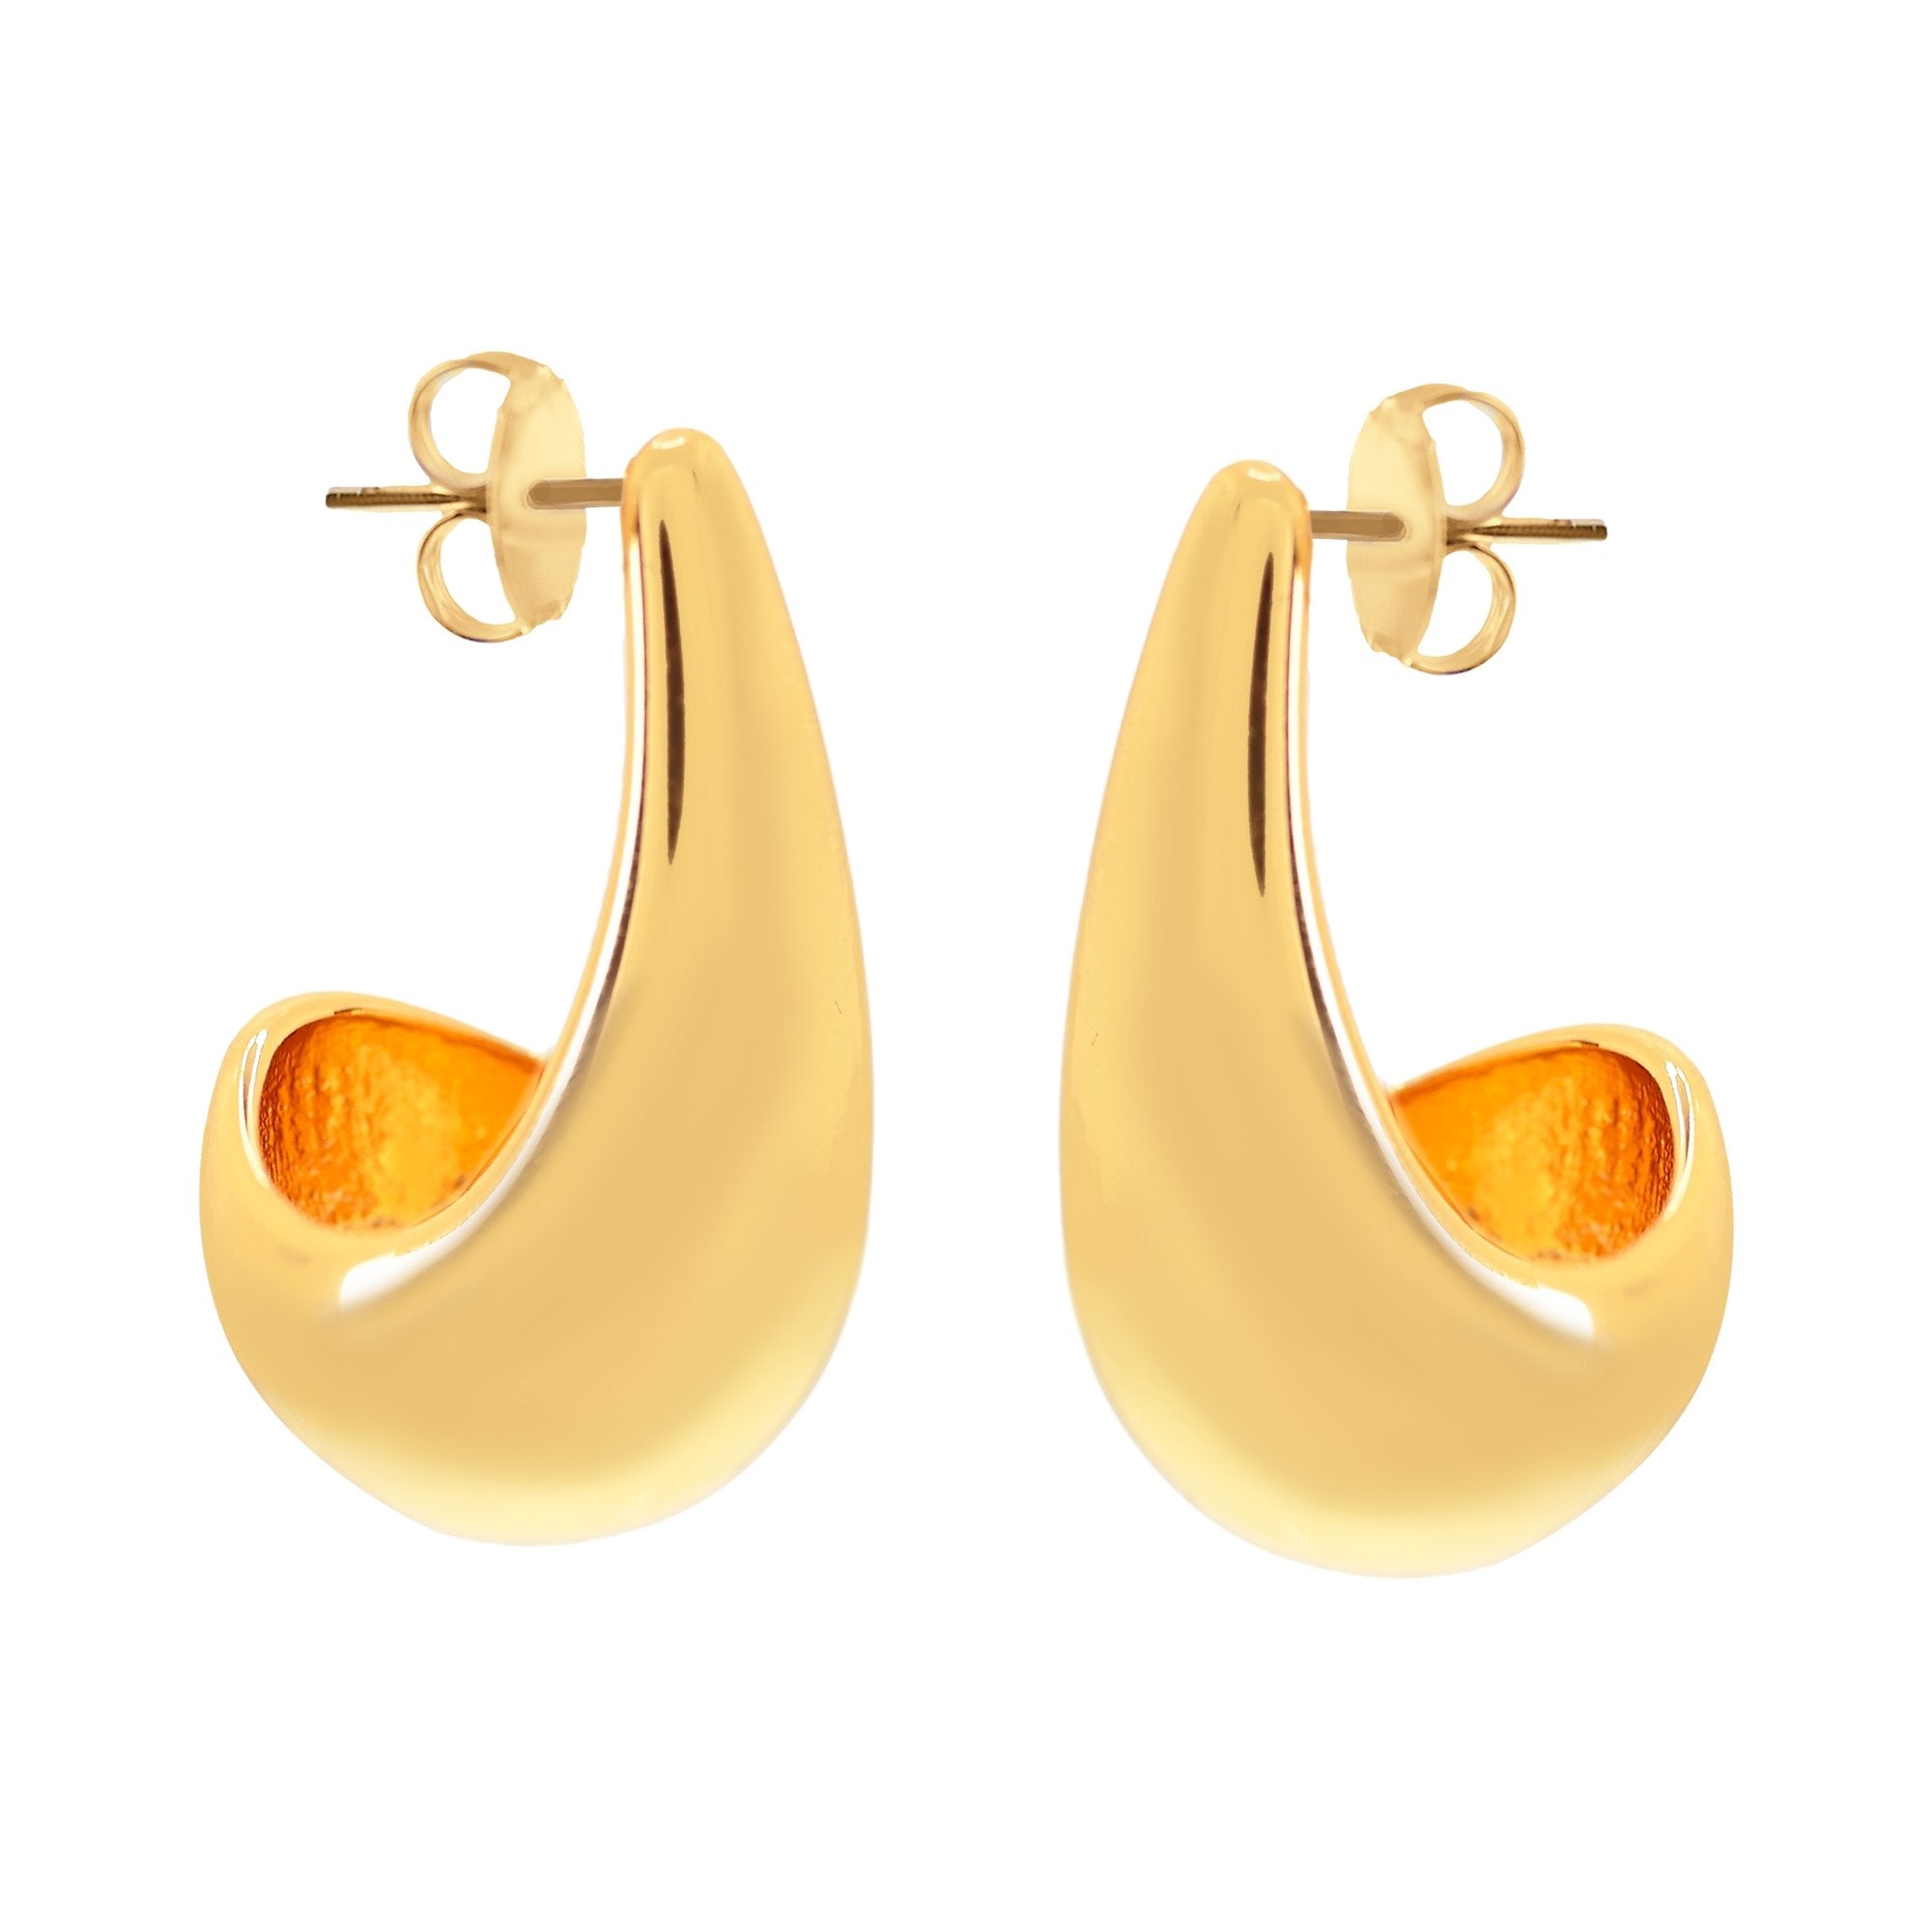 'PENSIVE' Earrings -Gold Large- - Ibiza Passion